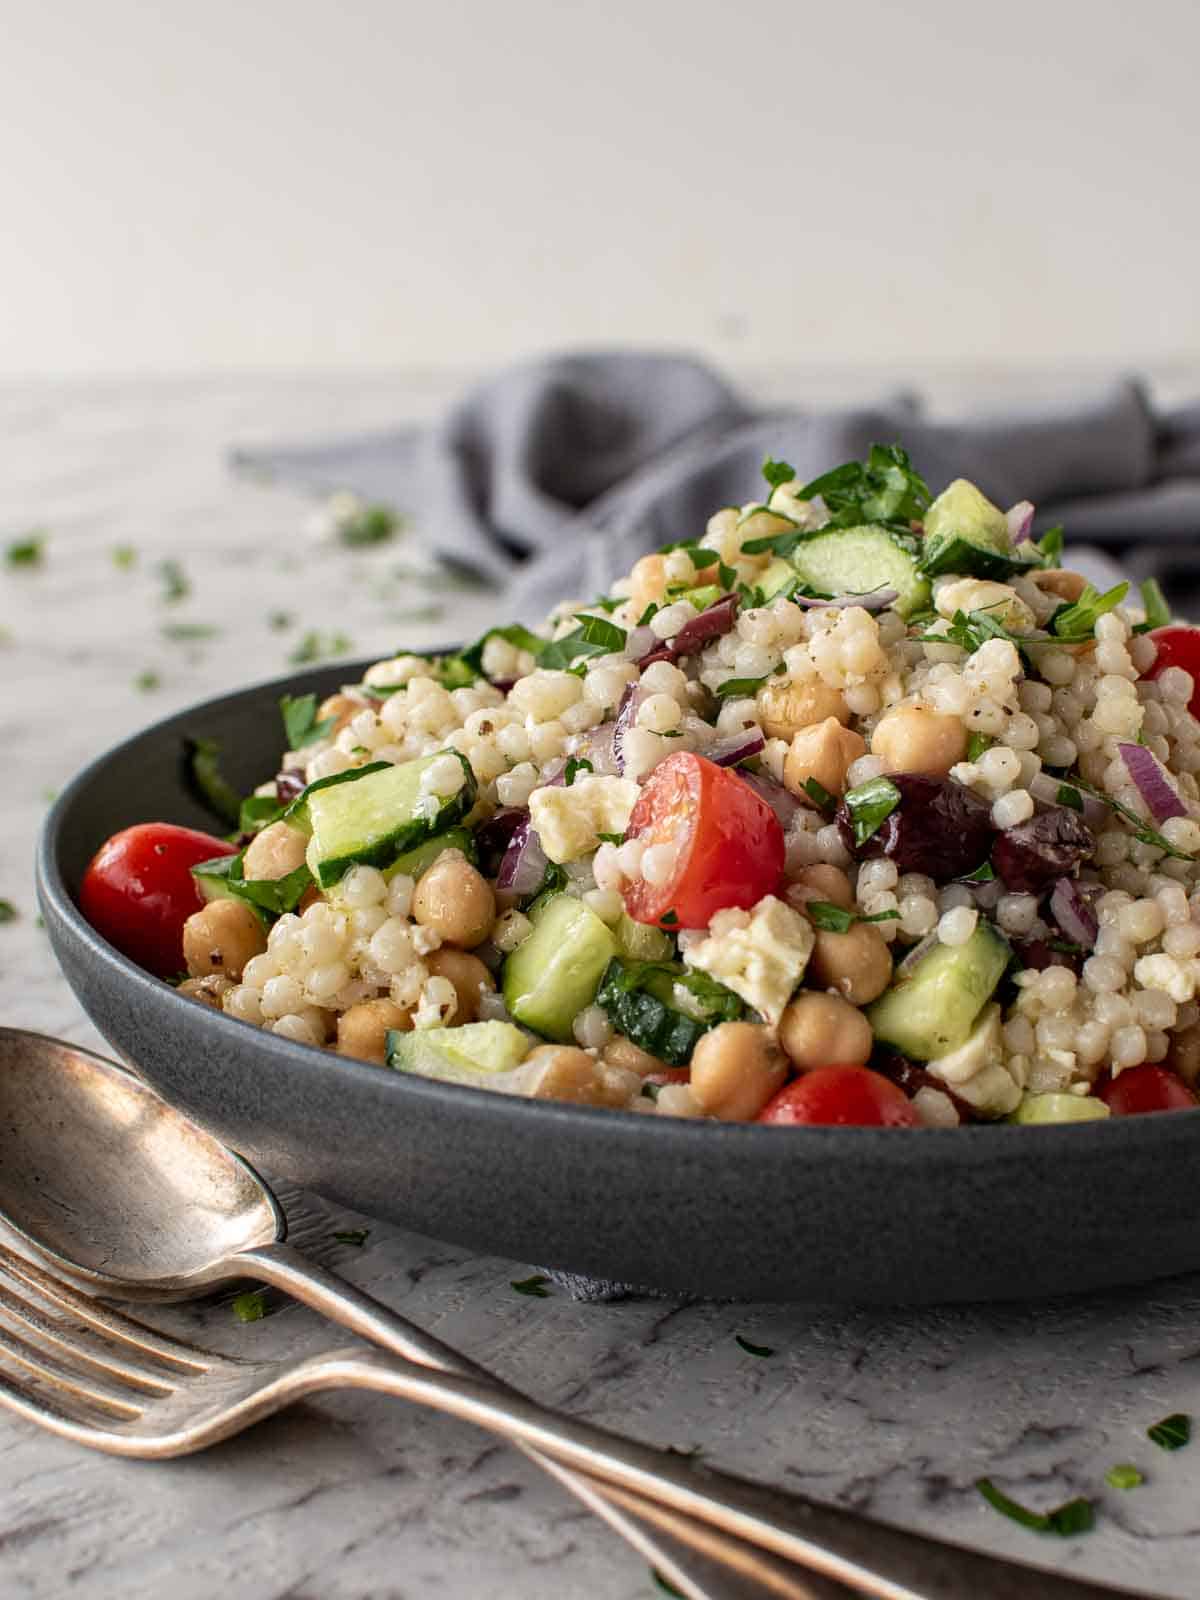 bowl of Greek couscous salad with fork and spoon and grey towel in the background.